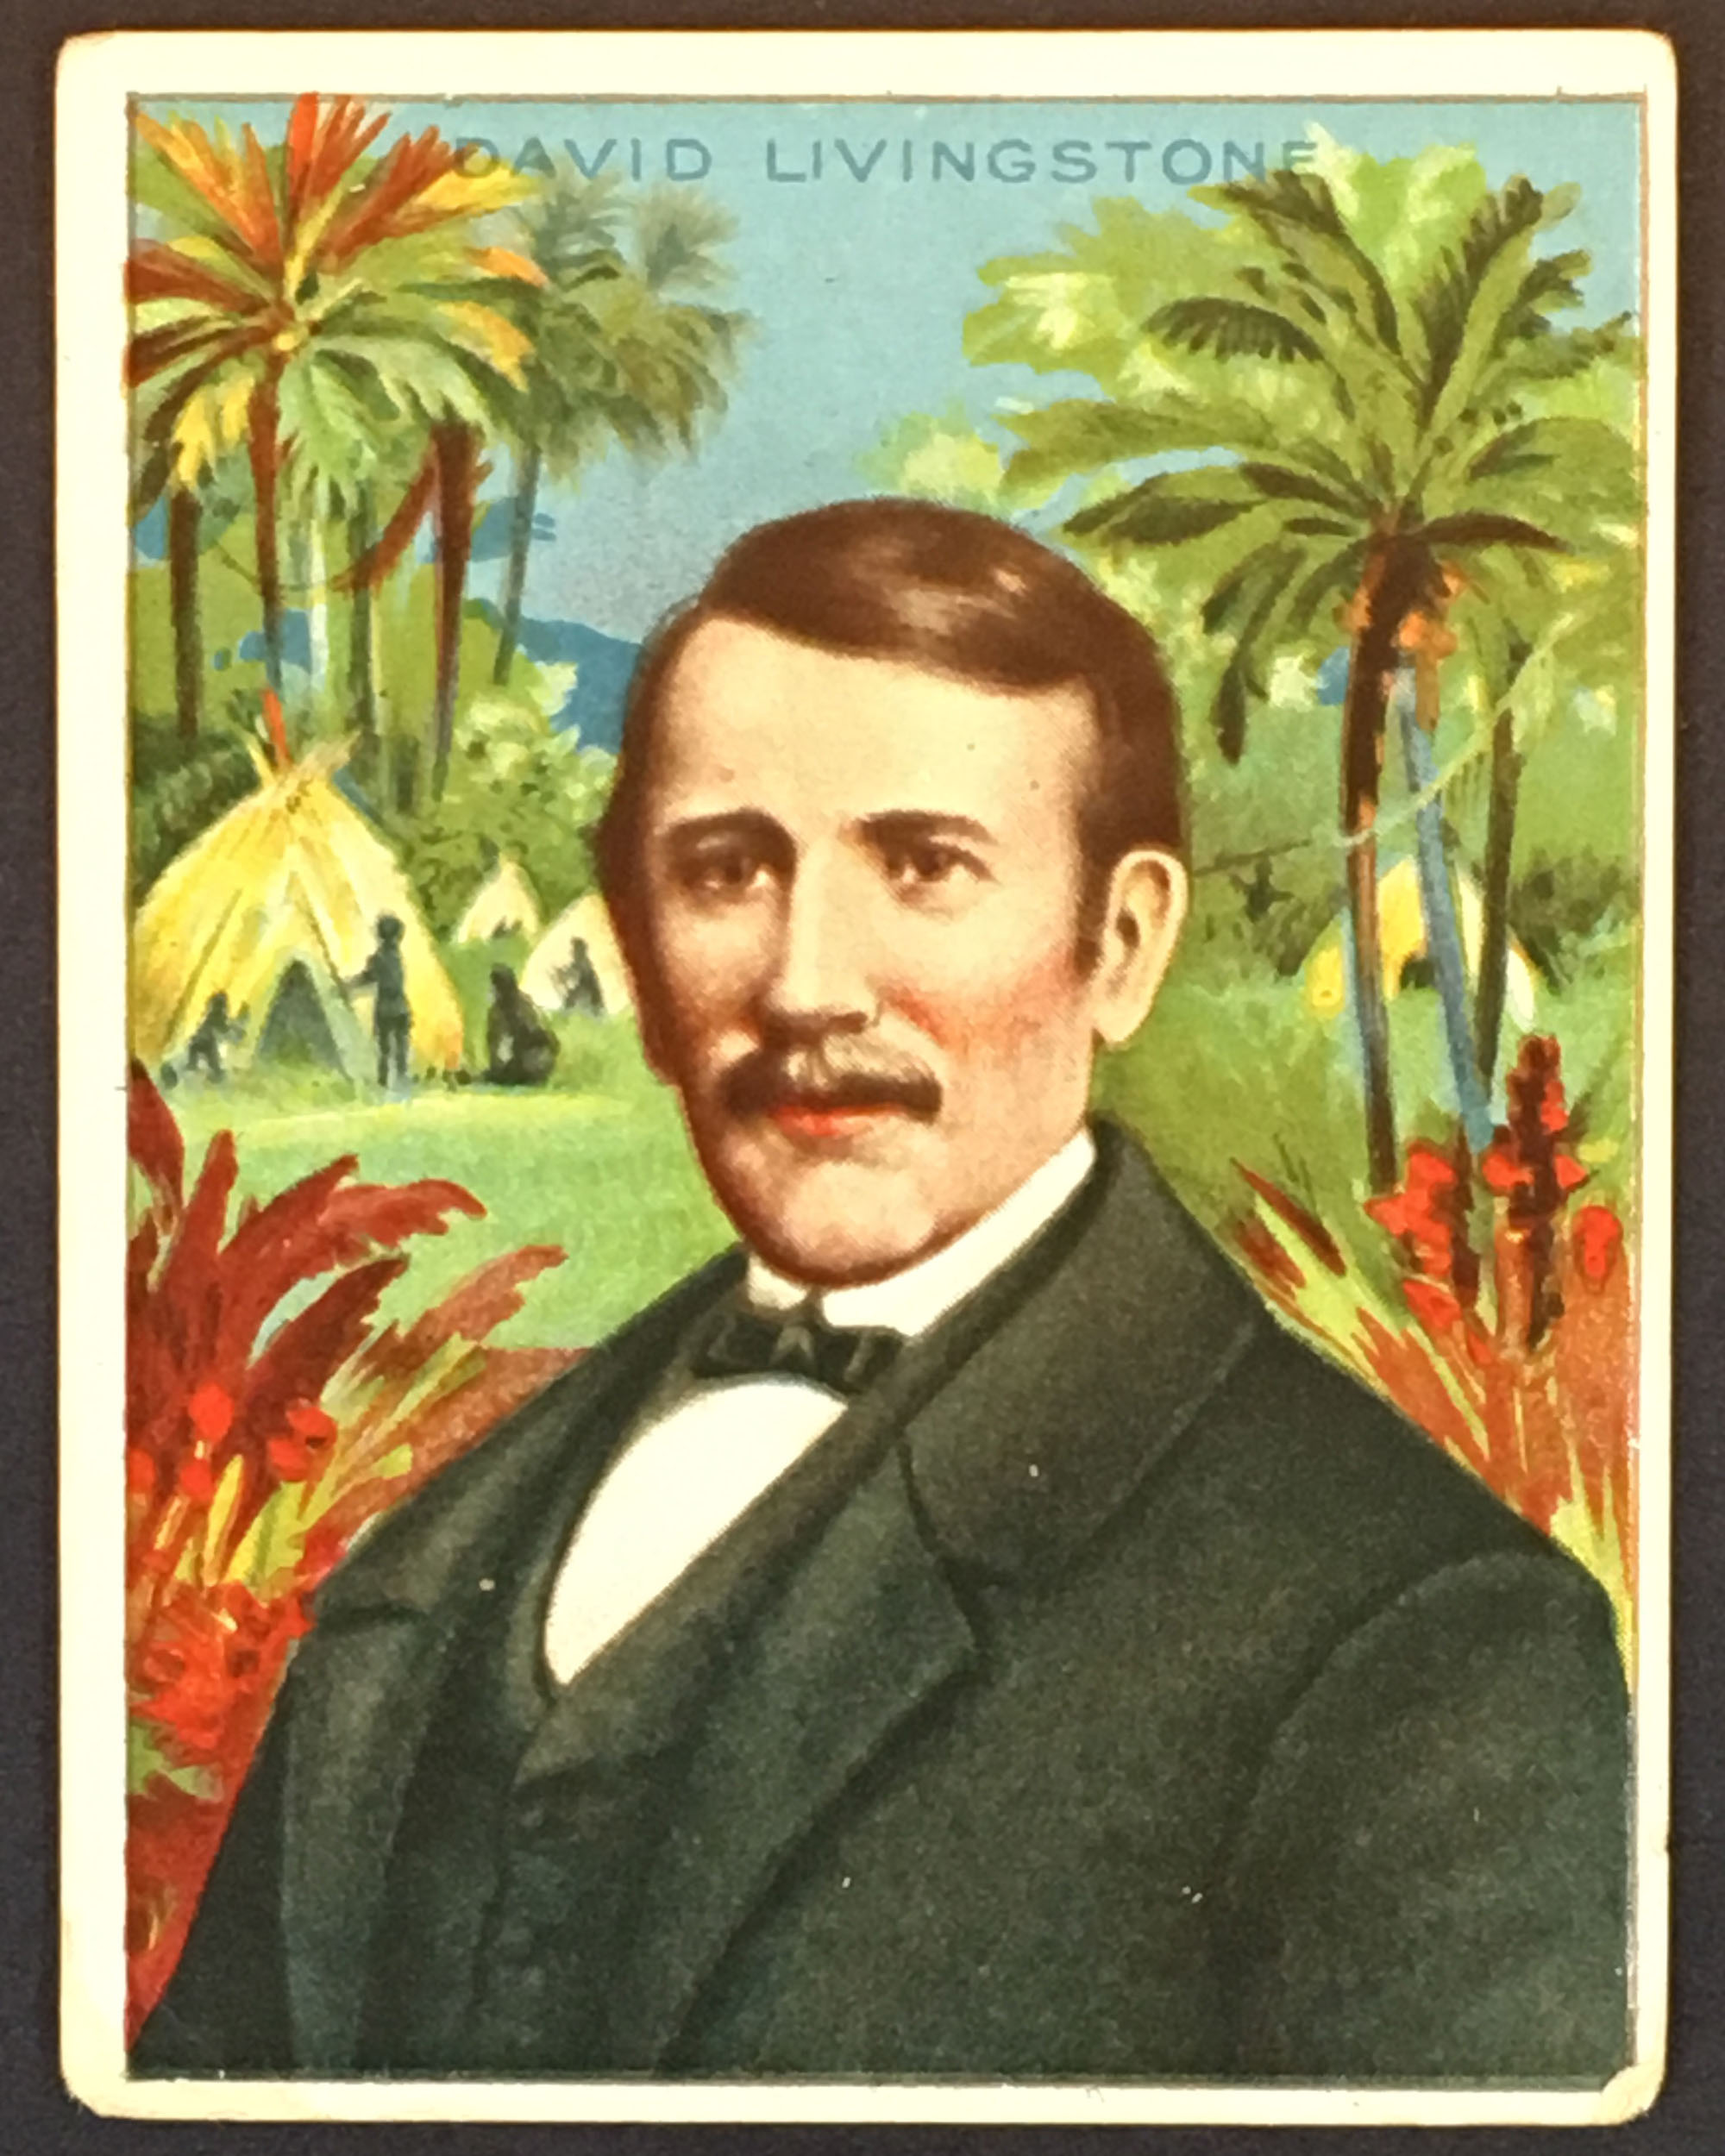 Greatest Explorers Tobacco Trading Card: David Livingstone, 1910, recto. Image copyright Adrian S. Wisnicki. Creative Commons Attribution-NonCommercial 3.0 Unported (https://creativecommons.org/licenses/by-nc/3.0/).